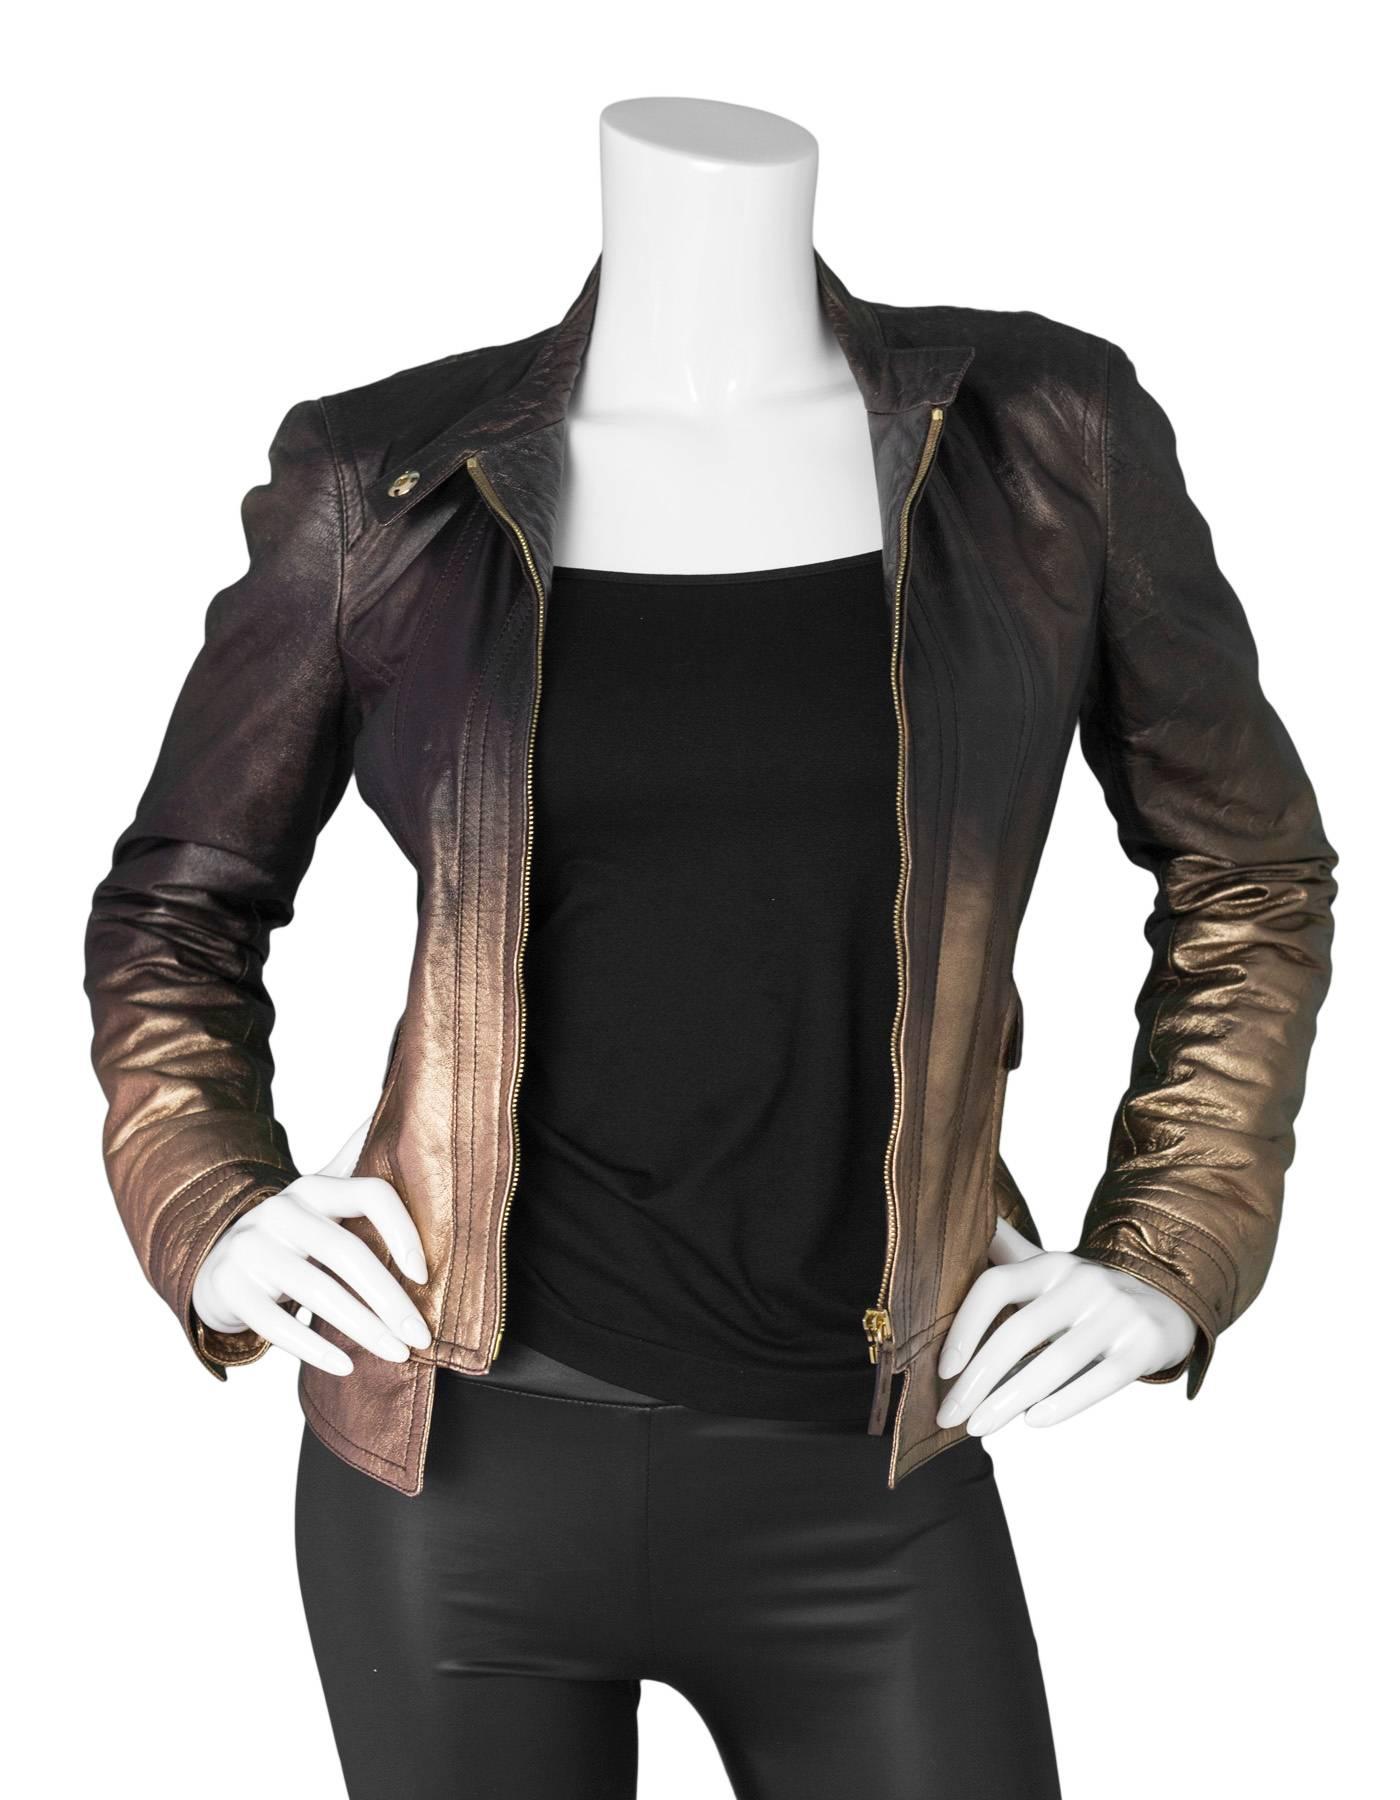 Roberto Cavalli Bronze Metallic Ombre Leather Jacket
Features braided leather drawstring detail at opening

Color: Bronze ombre
Composition: Not given- believed to be 100% leather
Lining: Bronze and black snakeskin print
Closure/Opening: Zip up